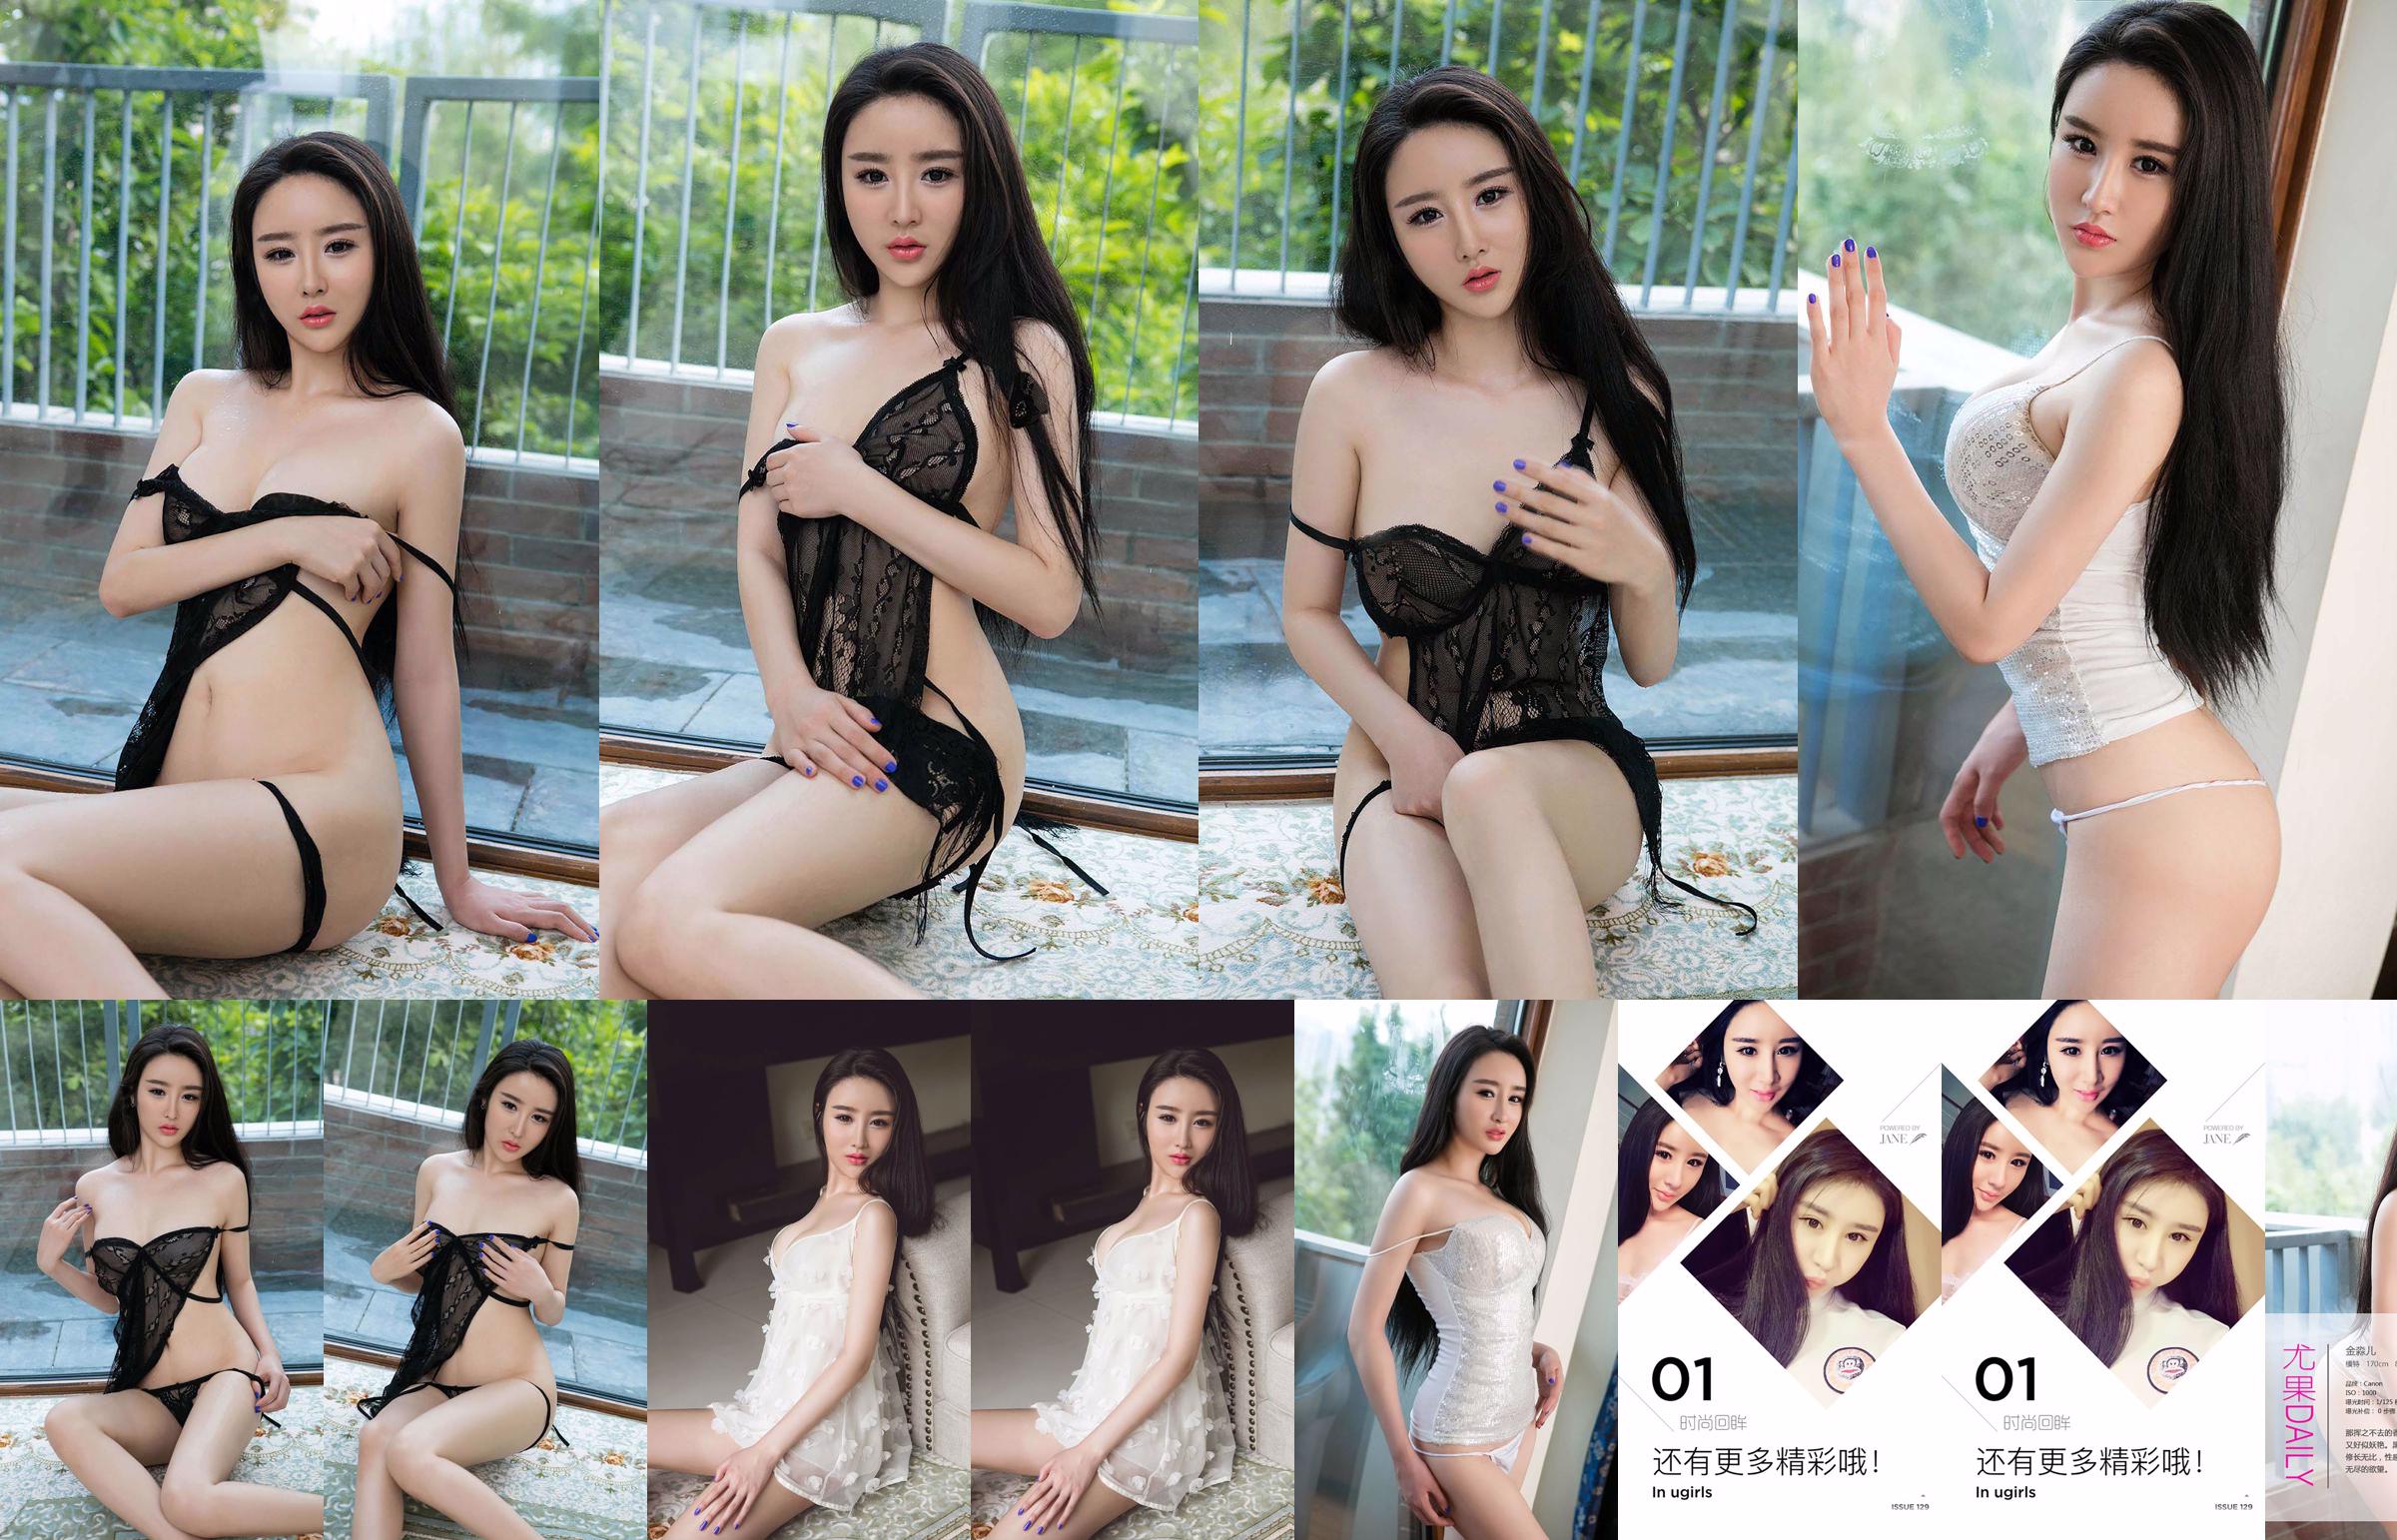 Xiaoqi "Love in the Bright Spring" [爱优物Ugirls] No.288 No.09cd6c Page 3